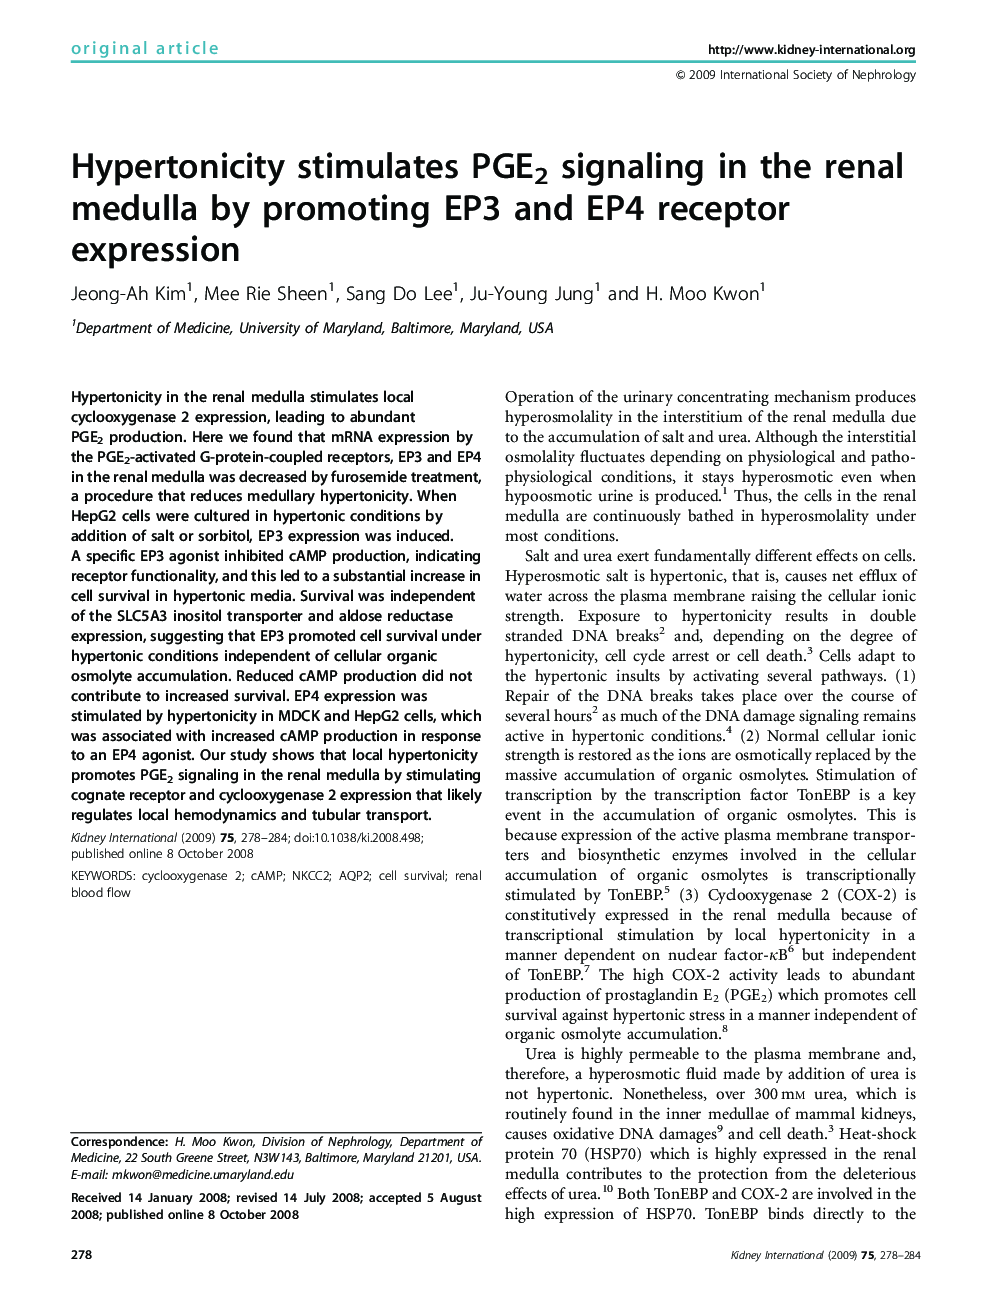 Hypertonicity stimulates PGE2 signaling in the renal medulla by promoting EP3 and EP4 receptor expression